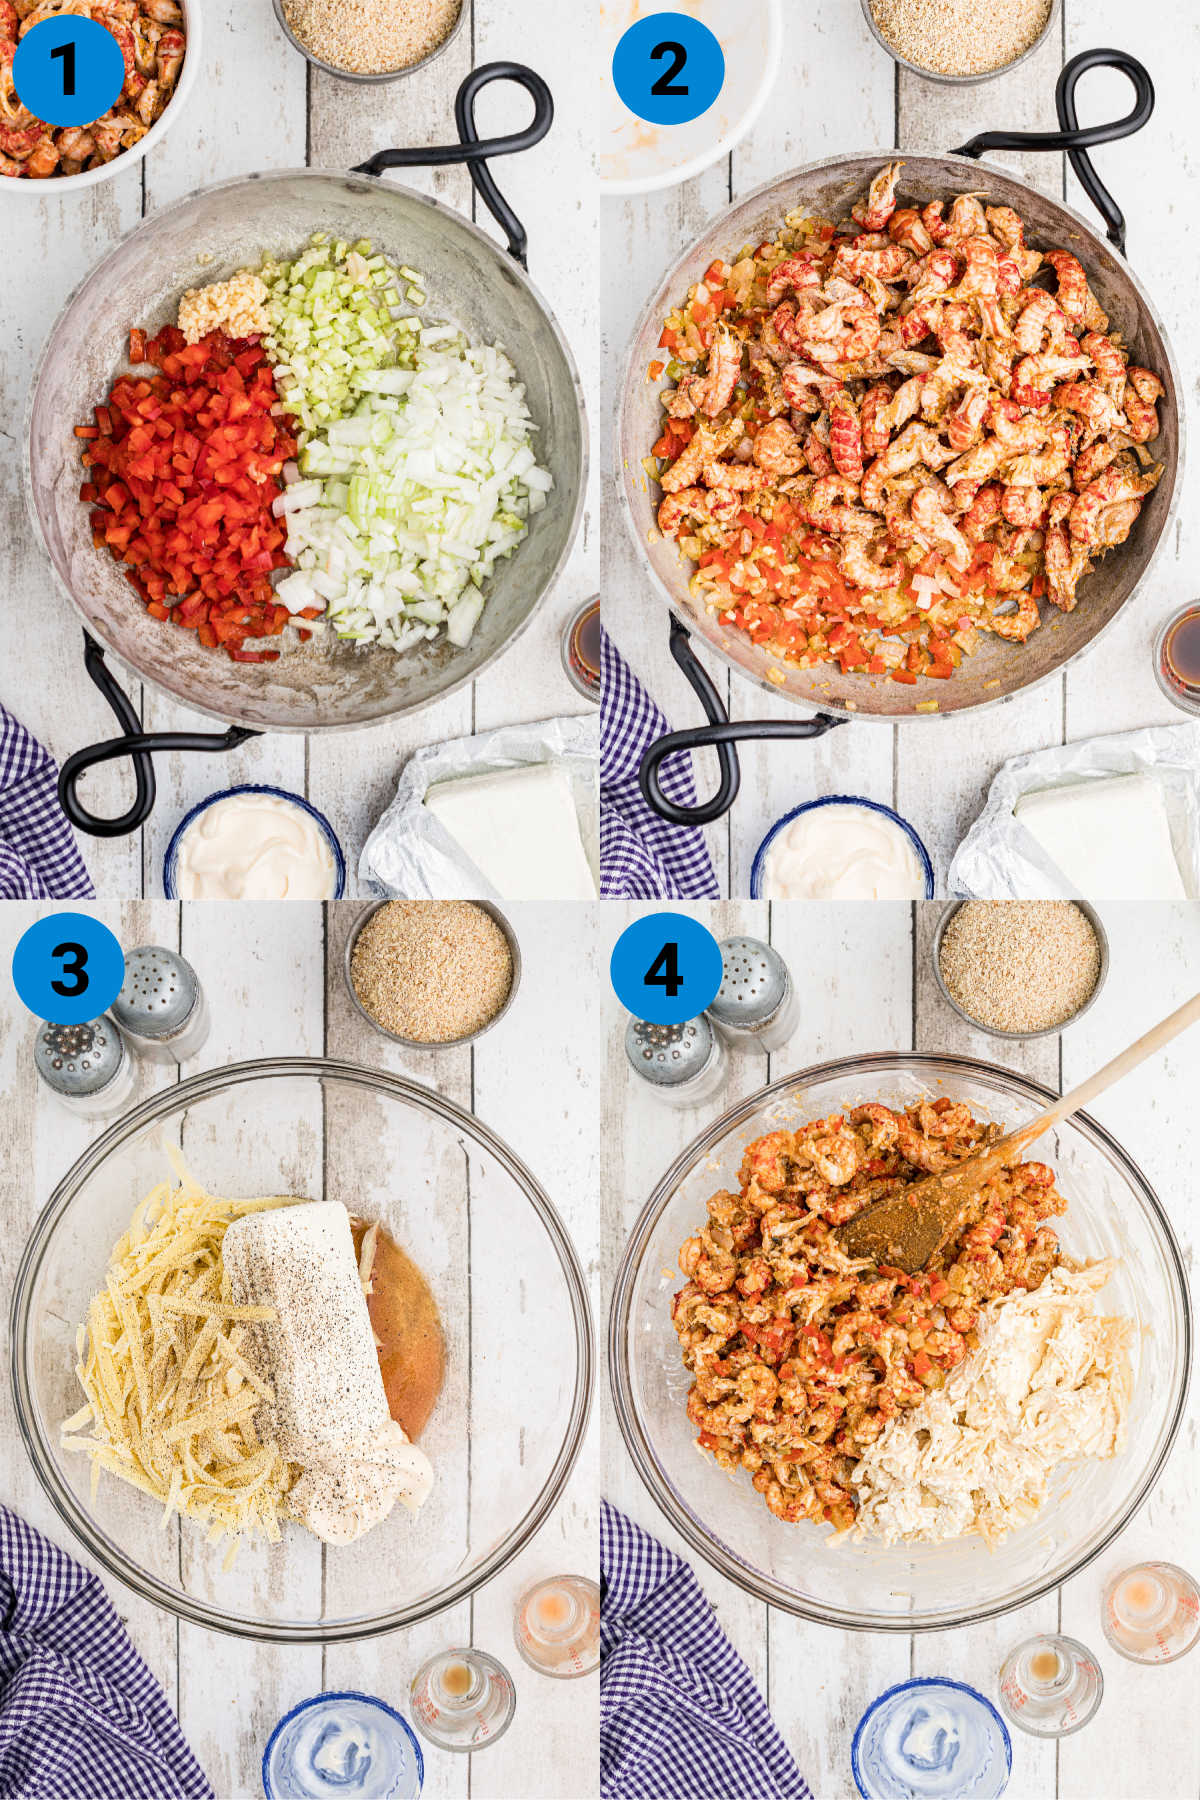 four images showing process steps on how to make a crawfish dip - this is process steps 1-4